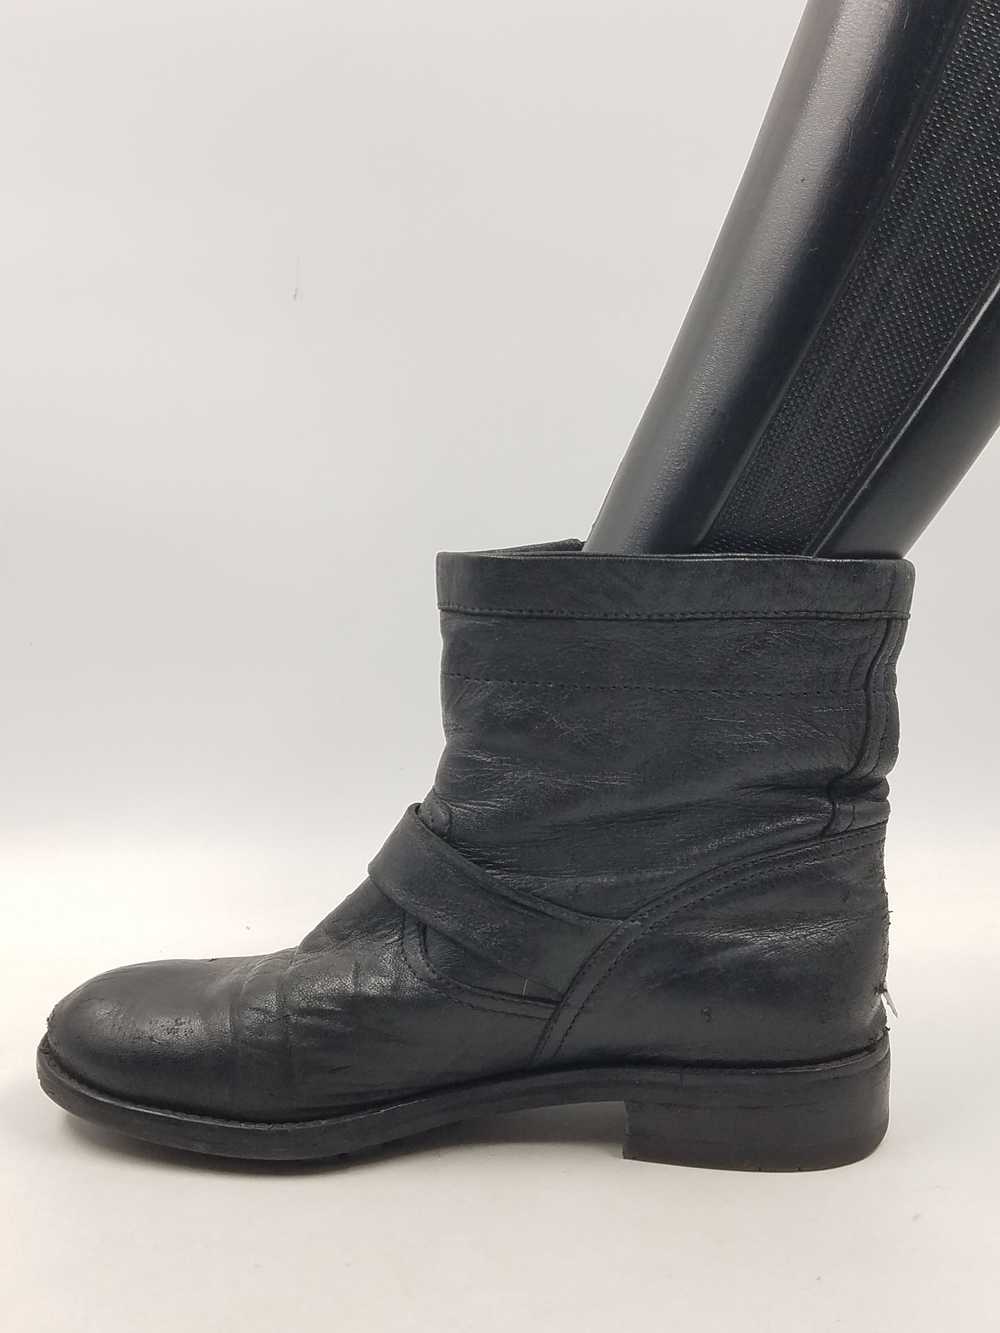 Authentic Jimmy Choo Black Engineer Boot W 8 - image 2